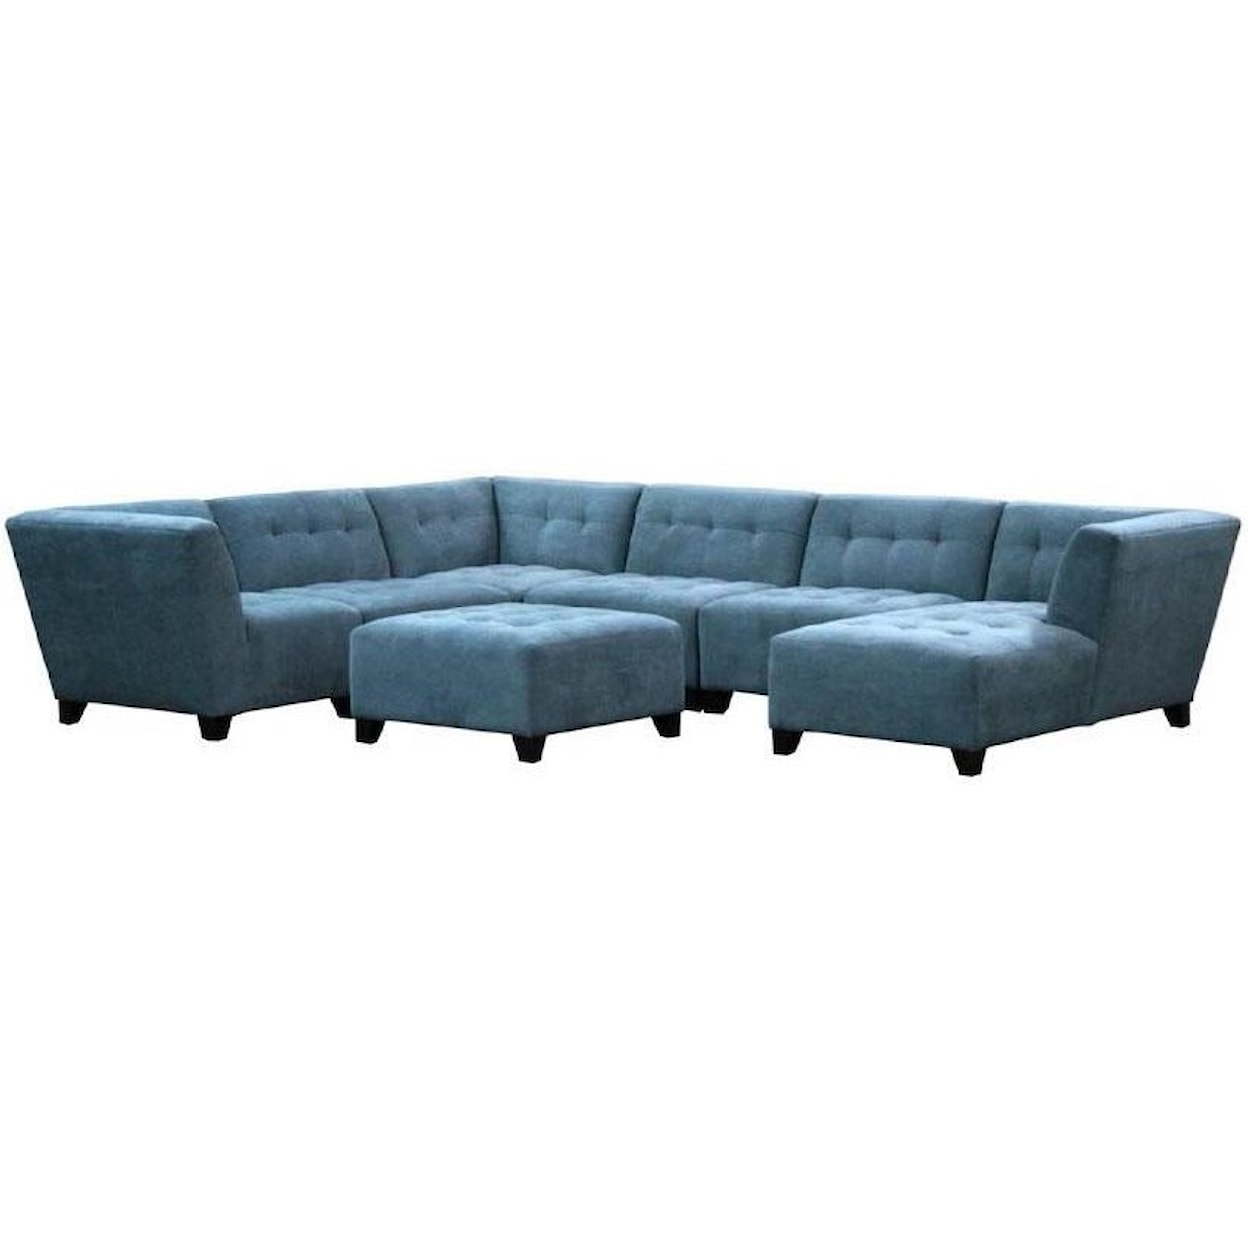 Jonathan Louis Belaire Contemporary Sectional 